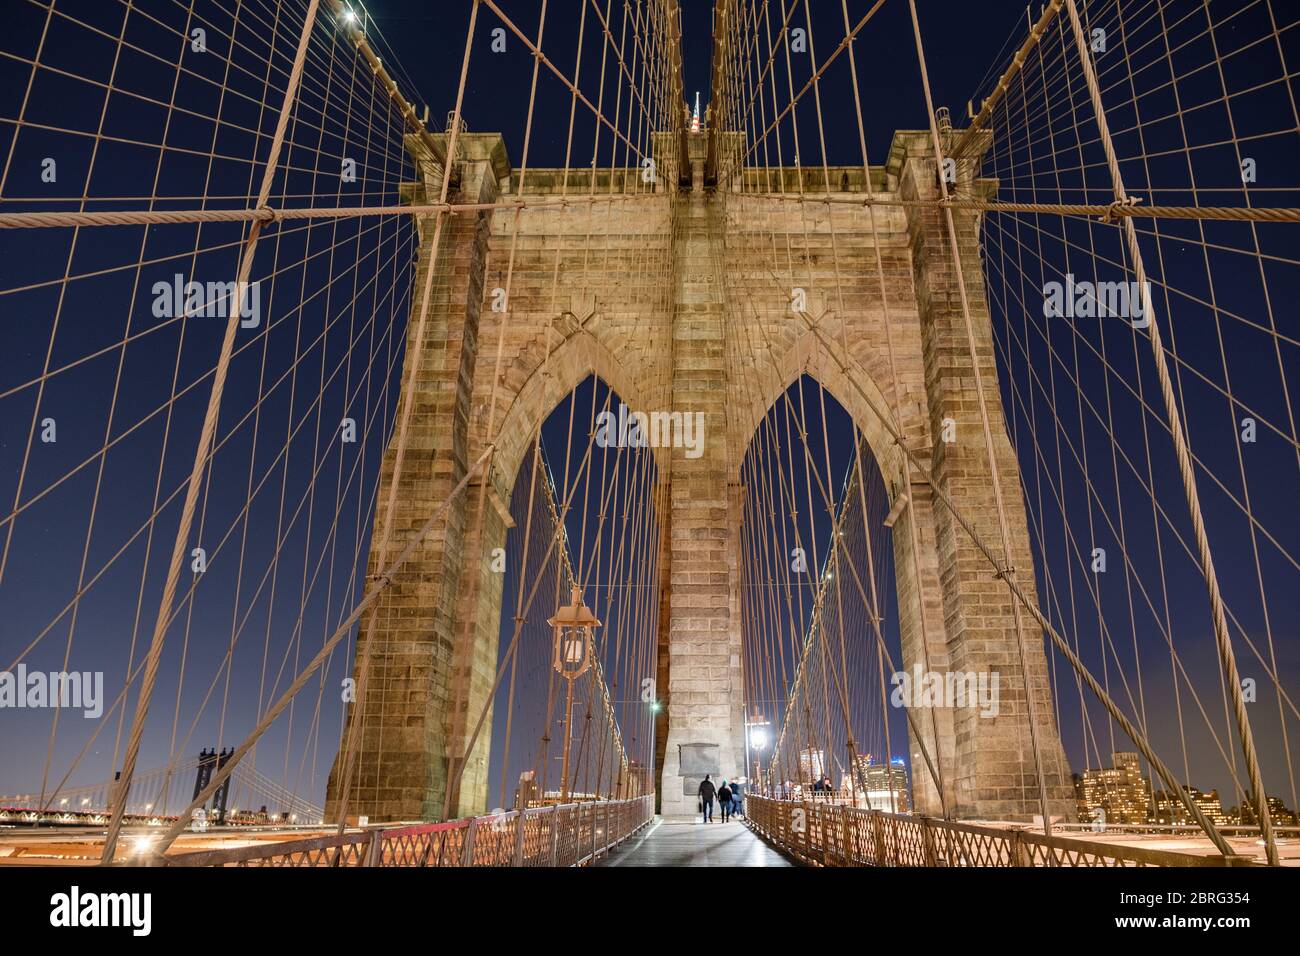 A long exposure of the arches of the Brooklyn Bridge at night, New York, USA Stock Photo